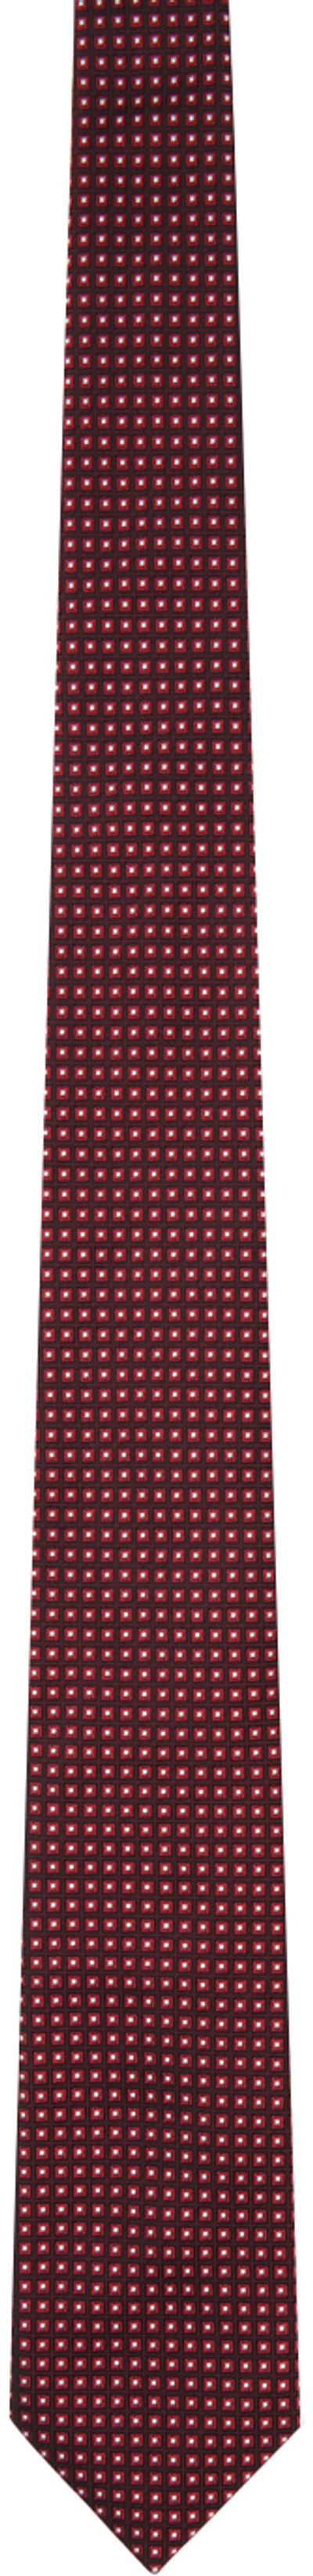 Zegna Red Jacquard Tie In Re1